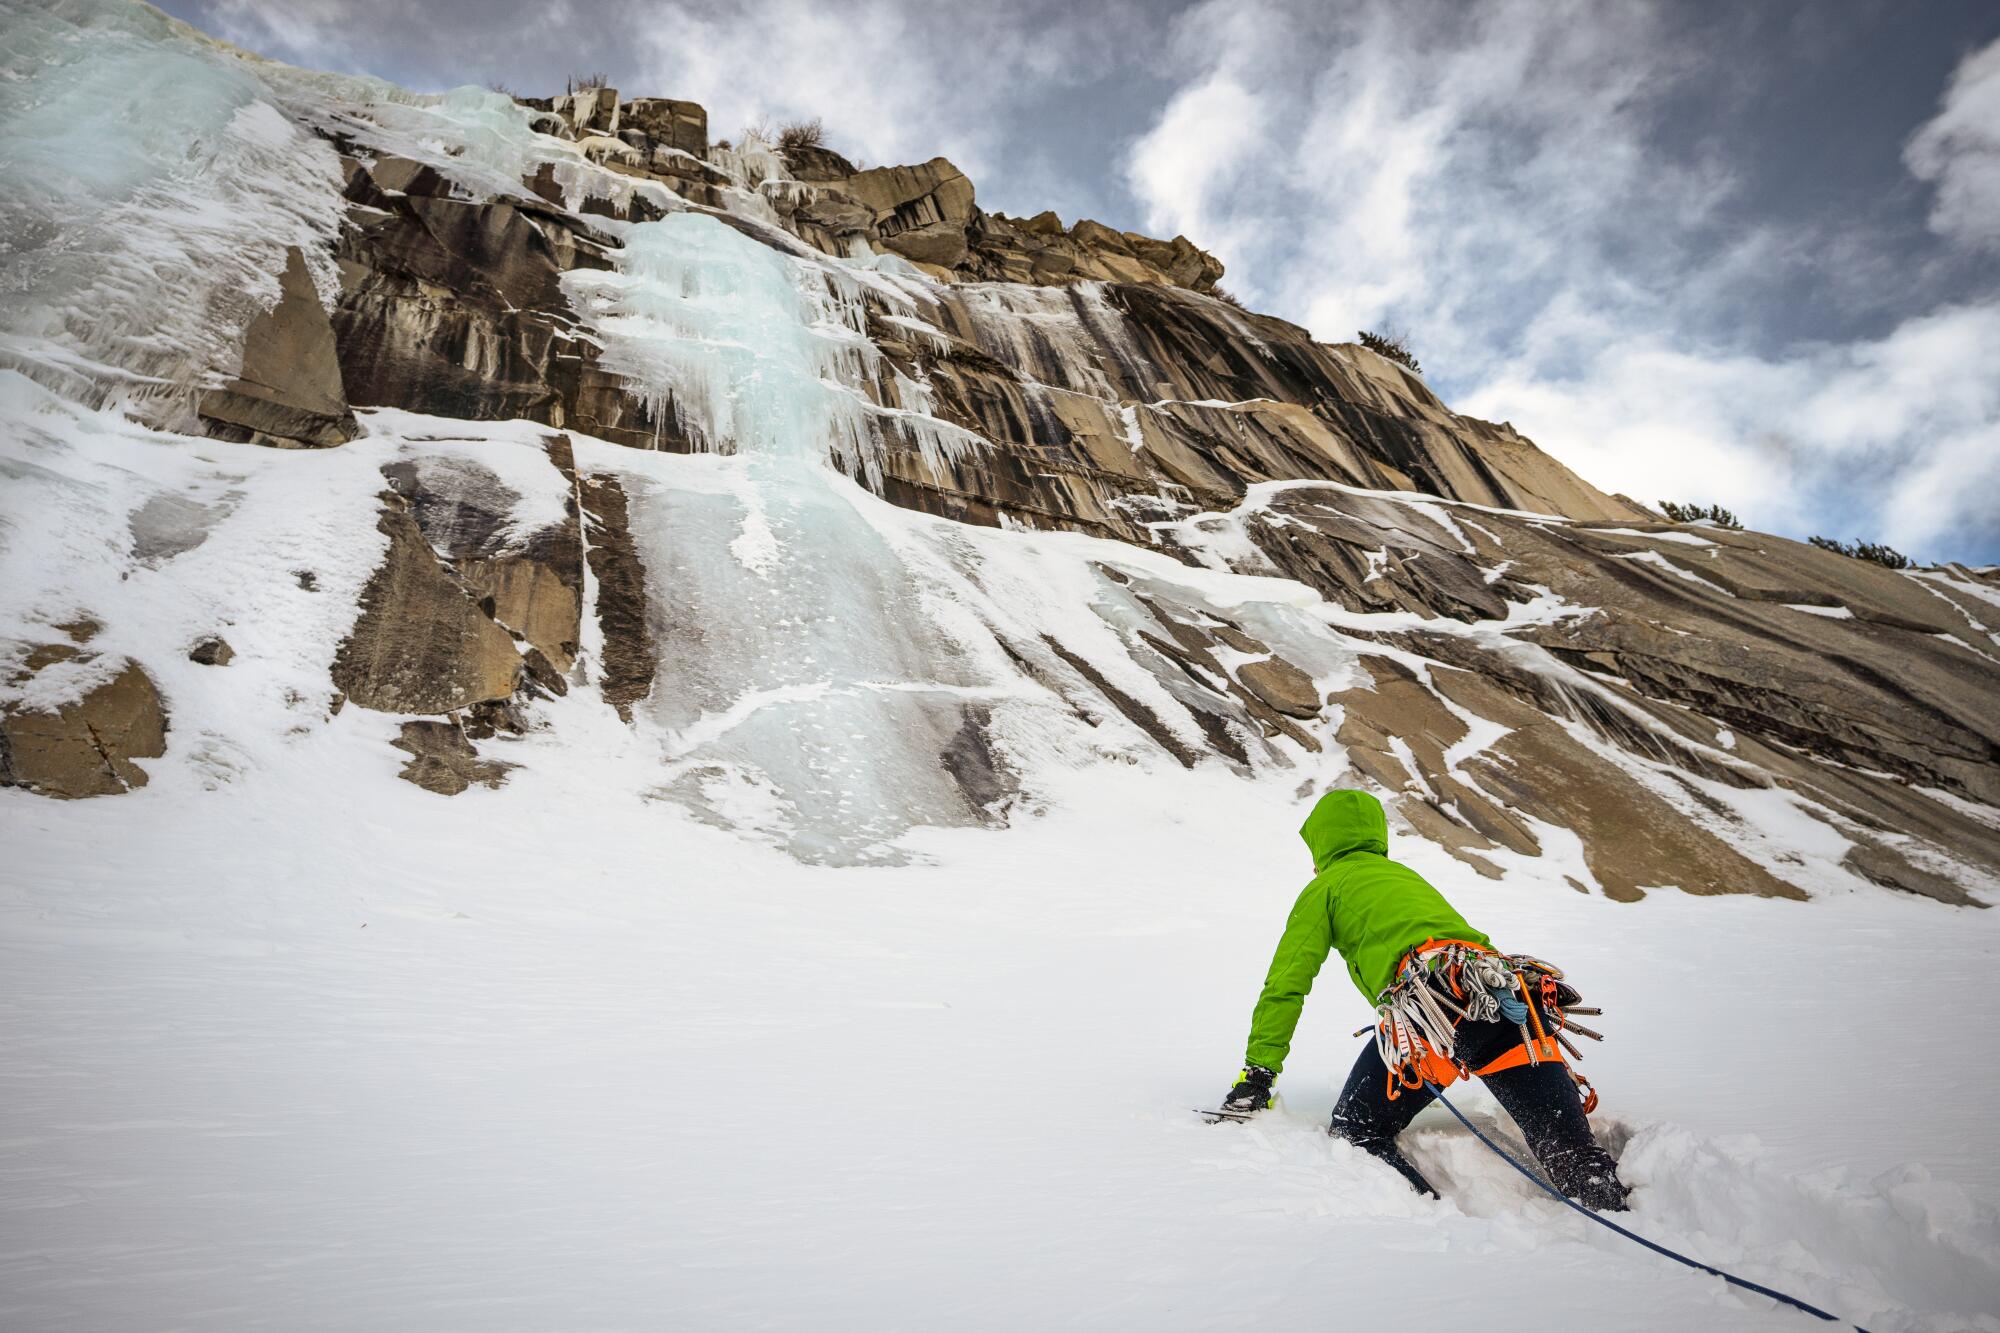 A person wearing a green jacket crouches below an iced-over cliffside.  